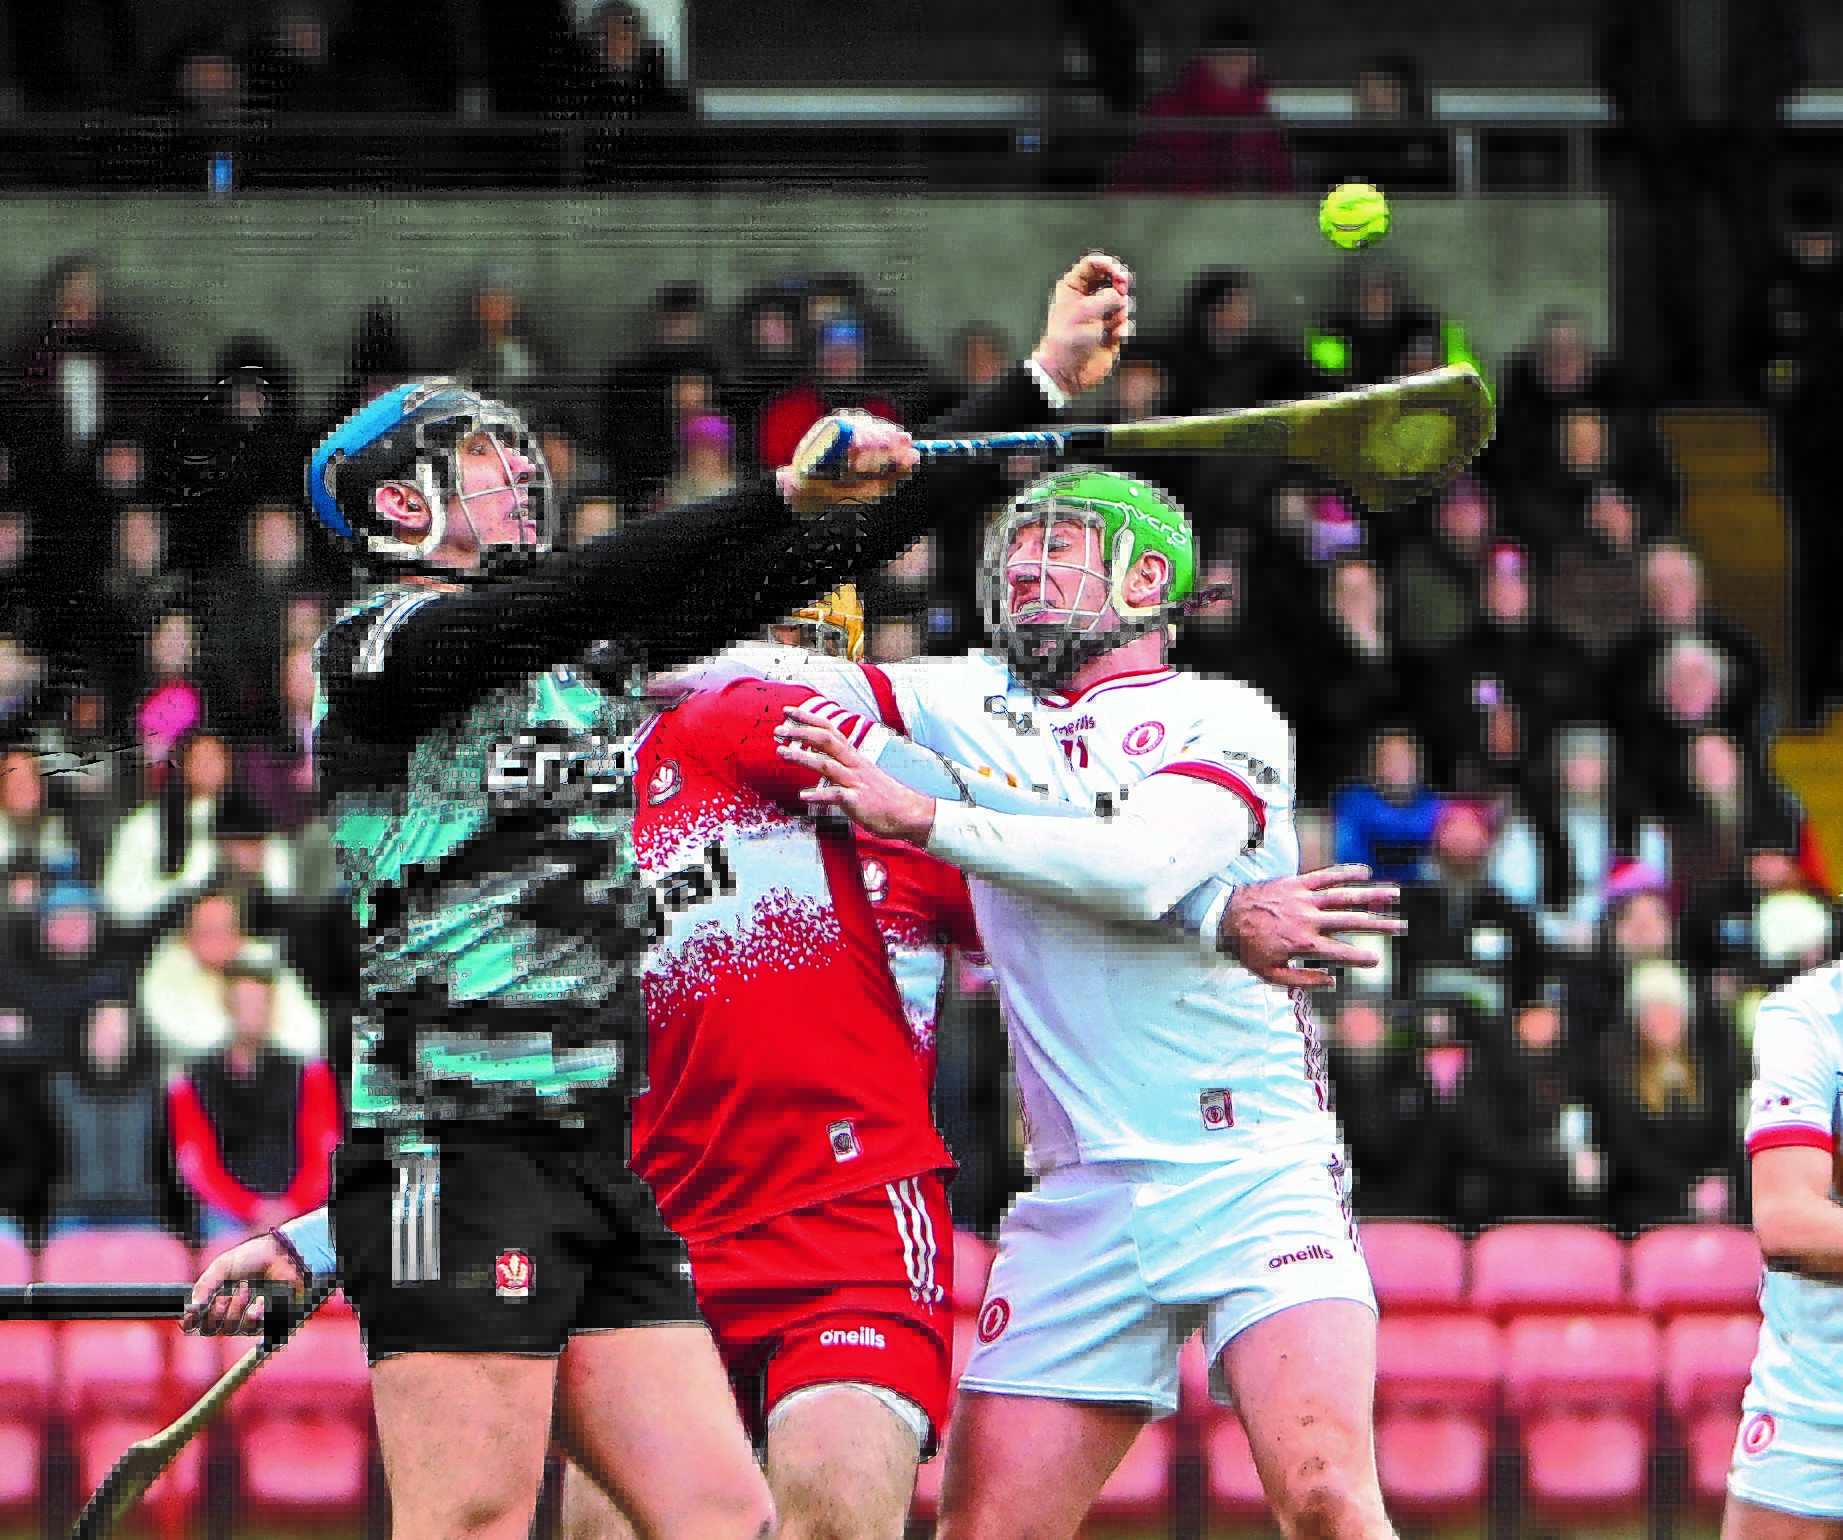 Hurlers hope to bounce back when Rossies visit